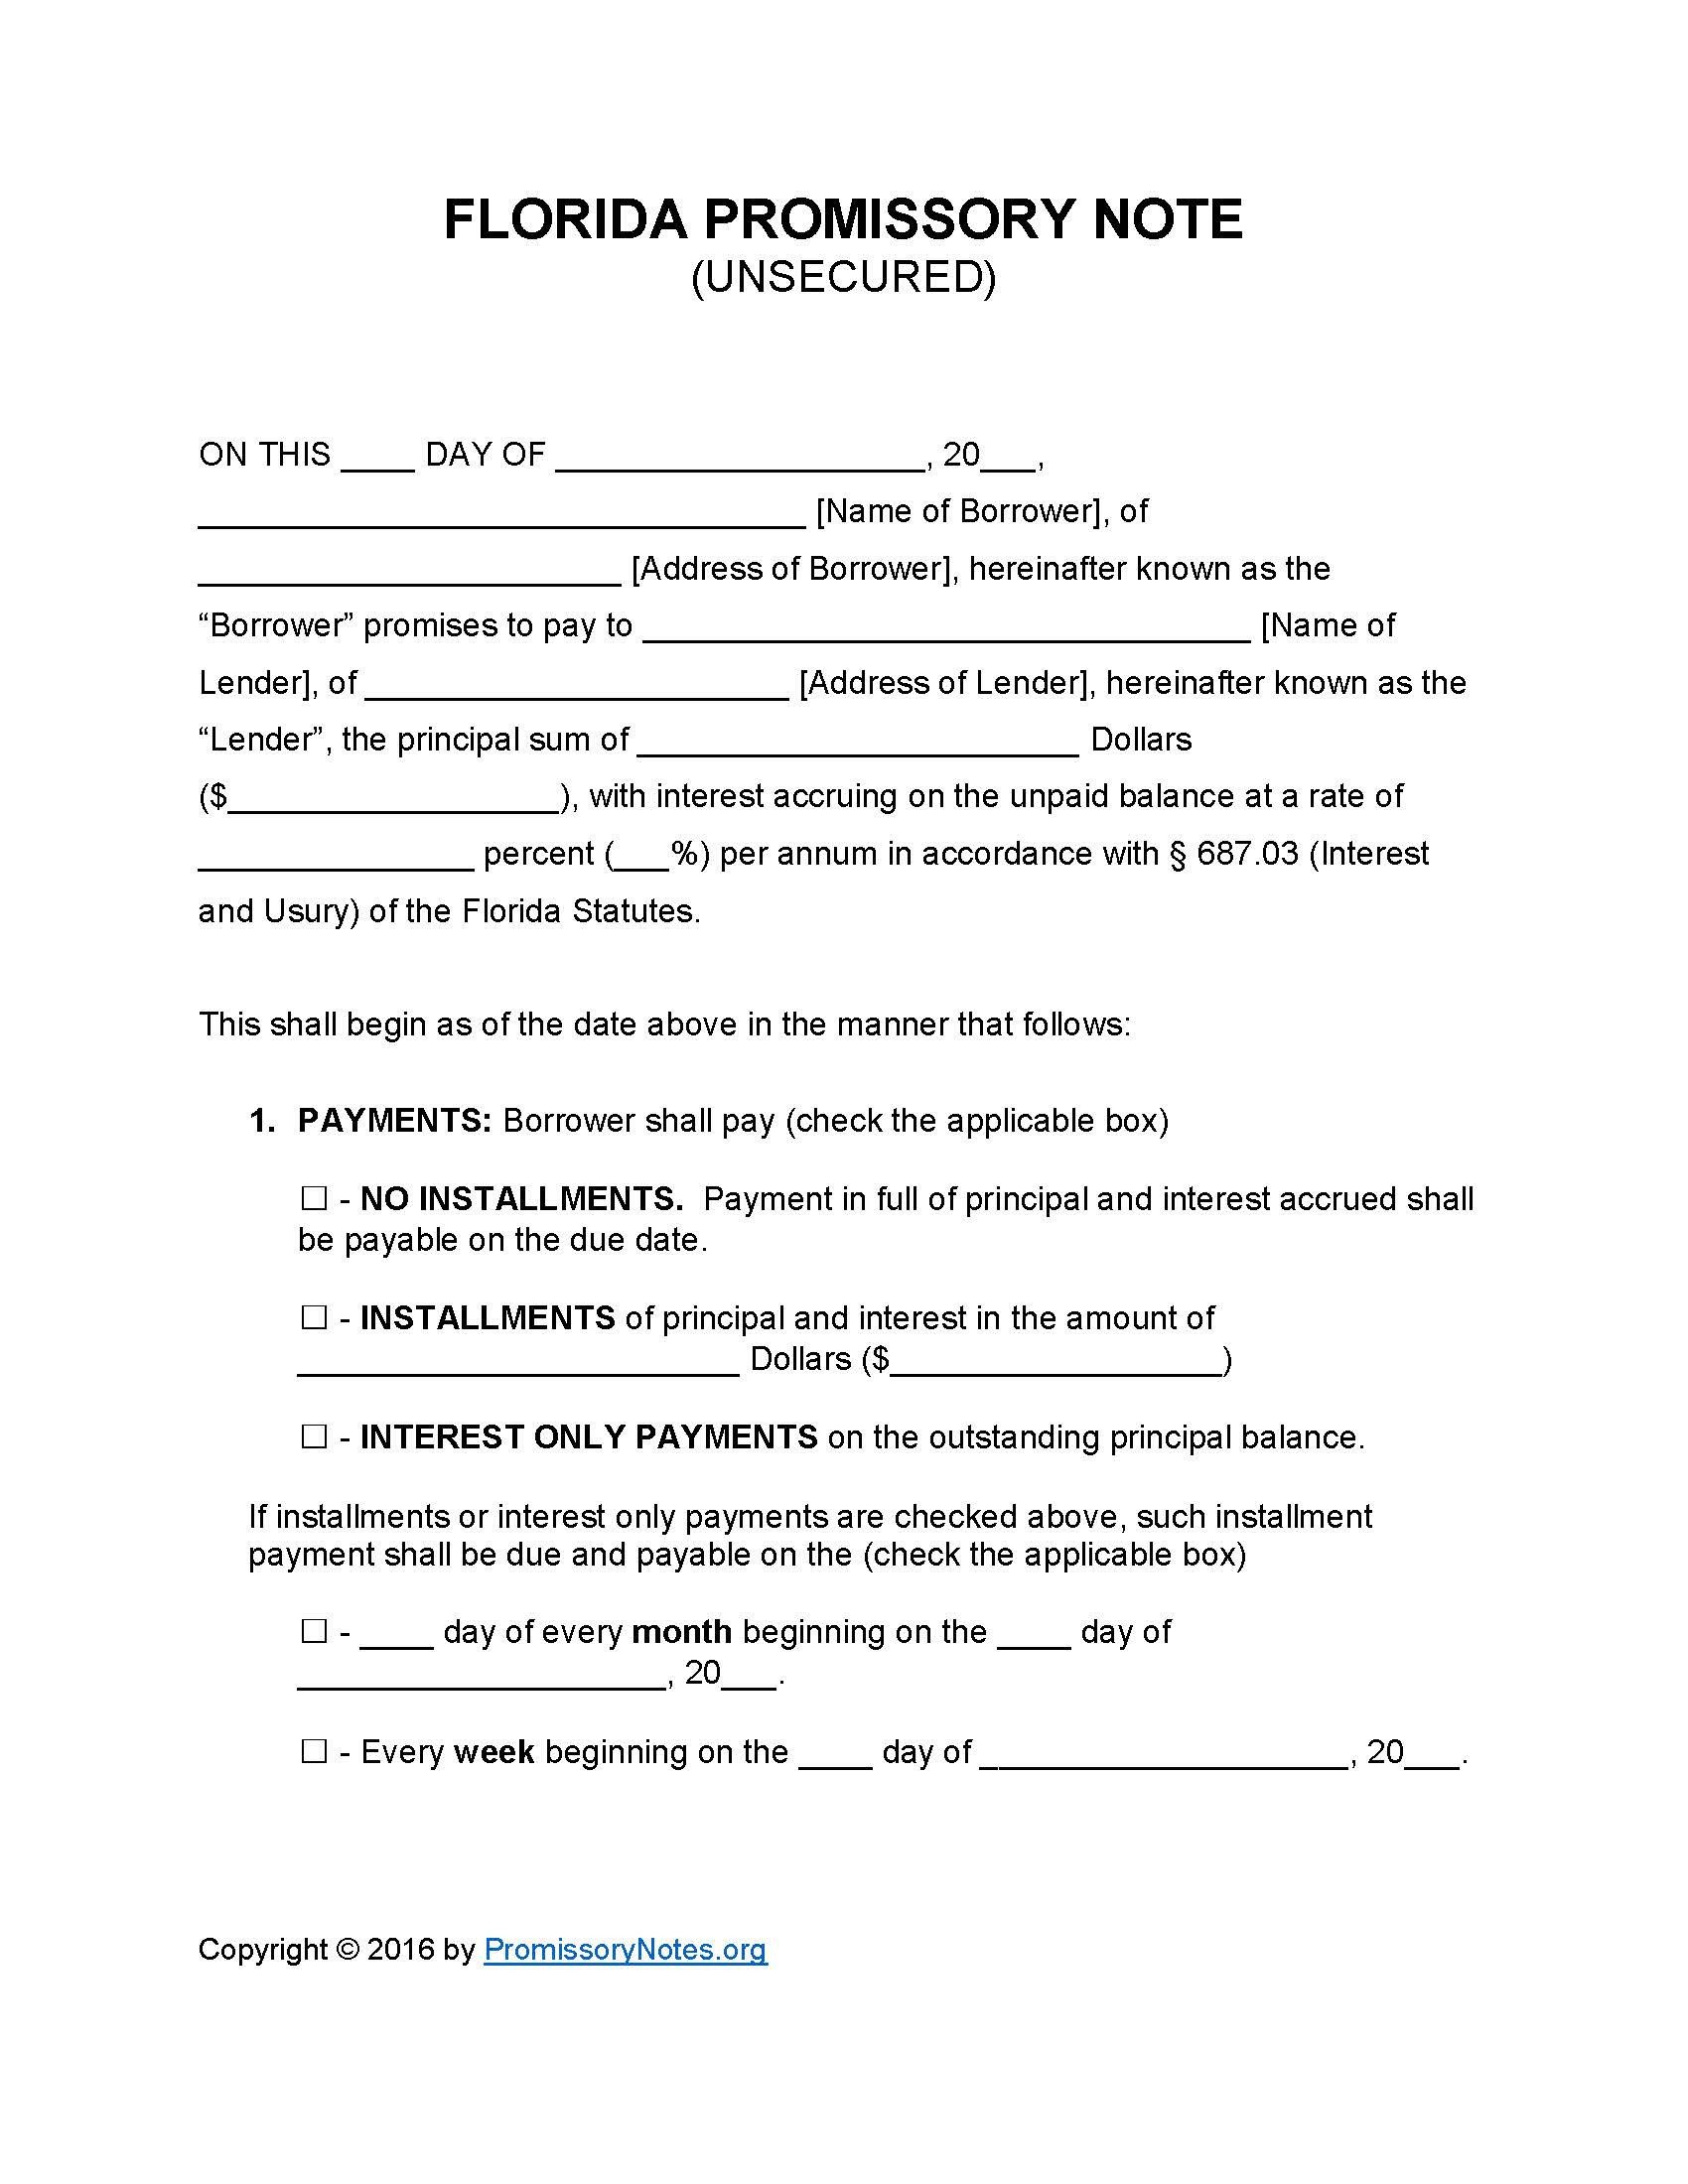 Florida Unsecured Promissory Note Template Promissory